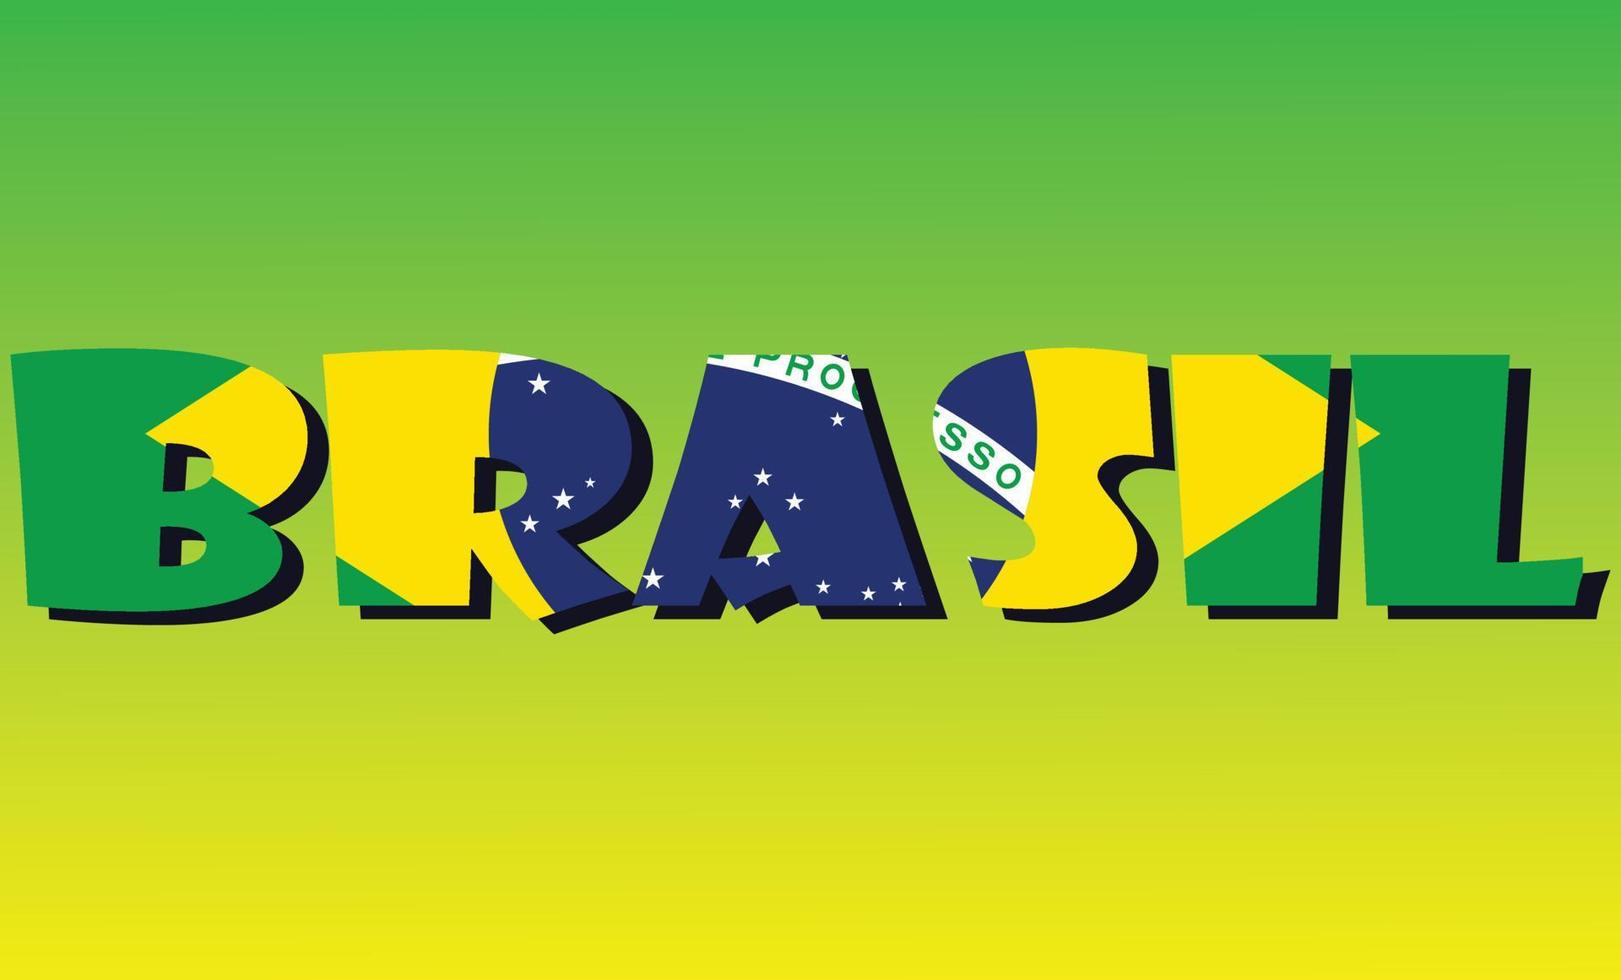 TEXT BRAZIL WITH FLAG ON THE INSIDE ON THE GREEN AND YELLOW BACKGROUND vector